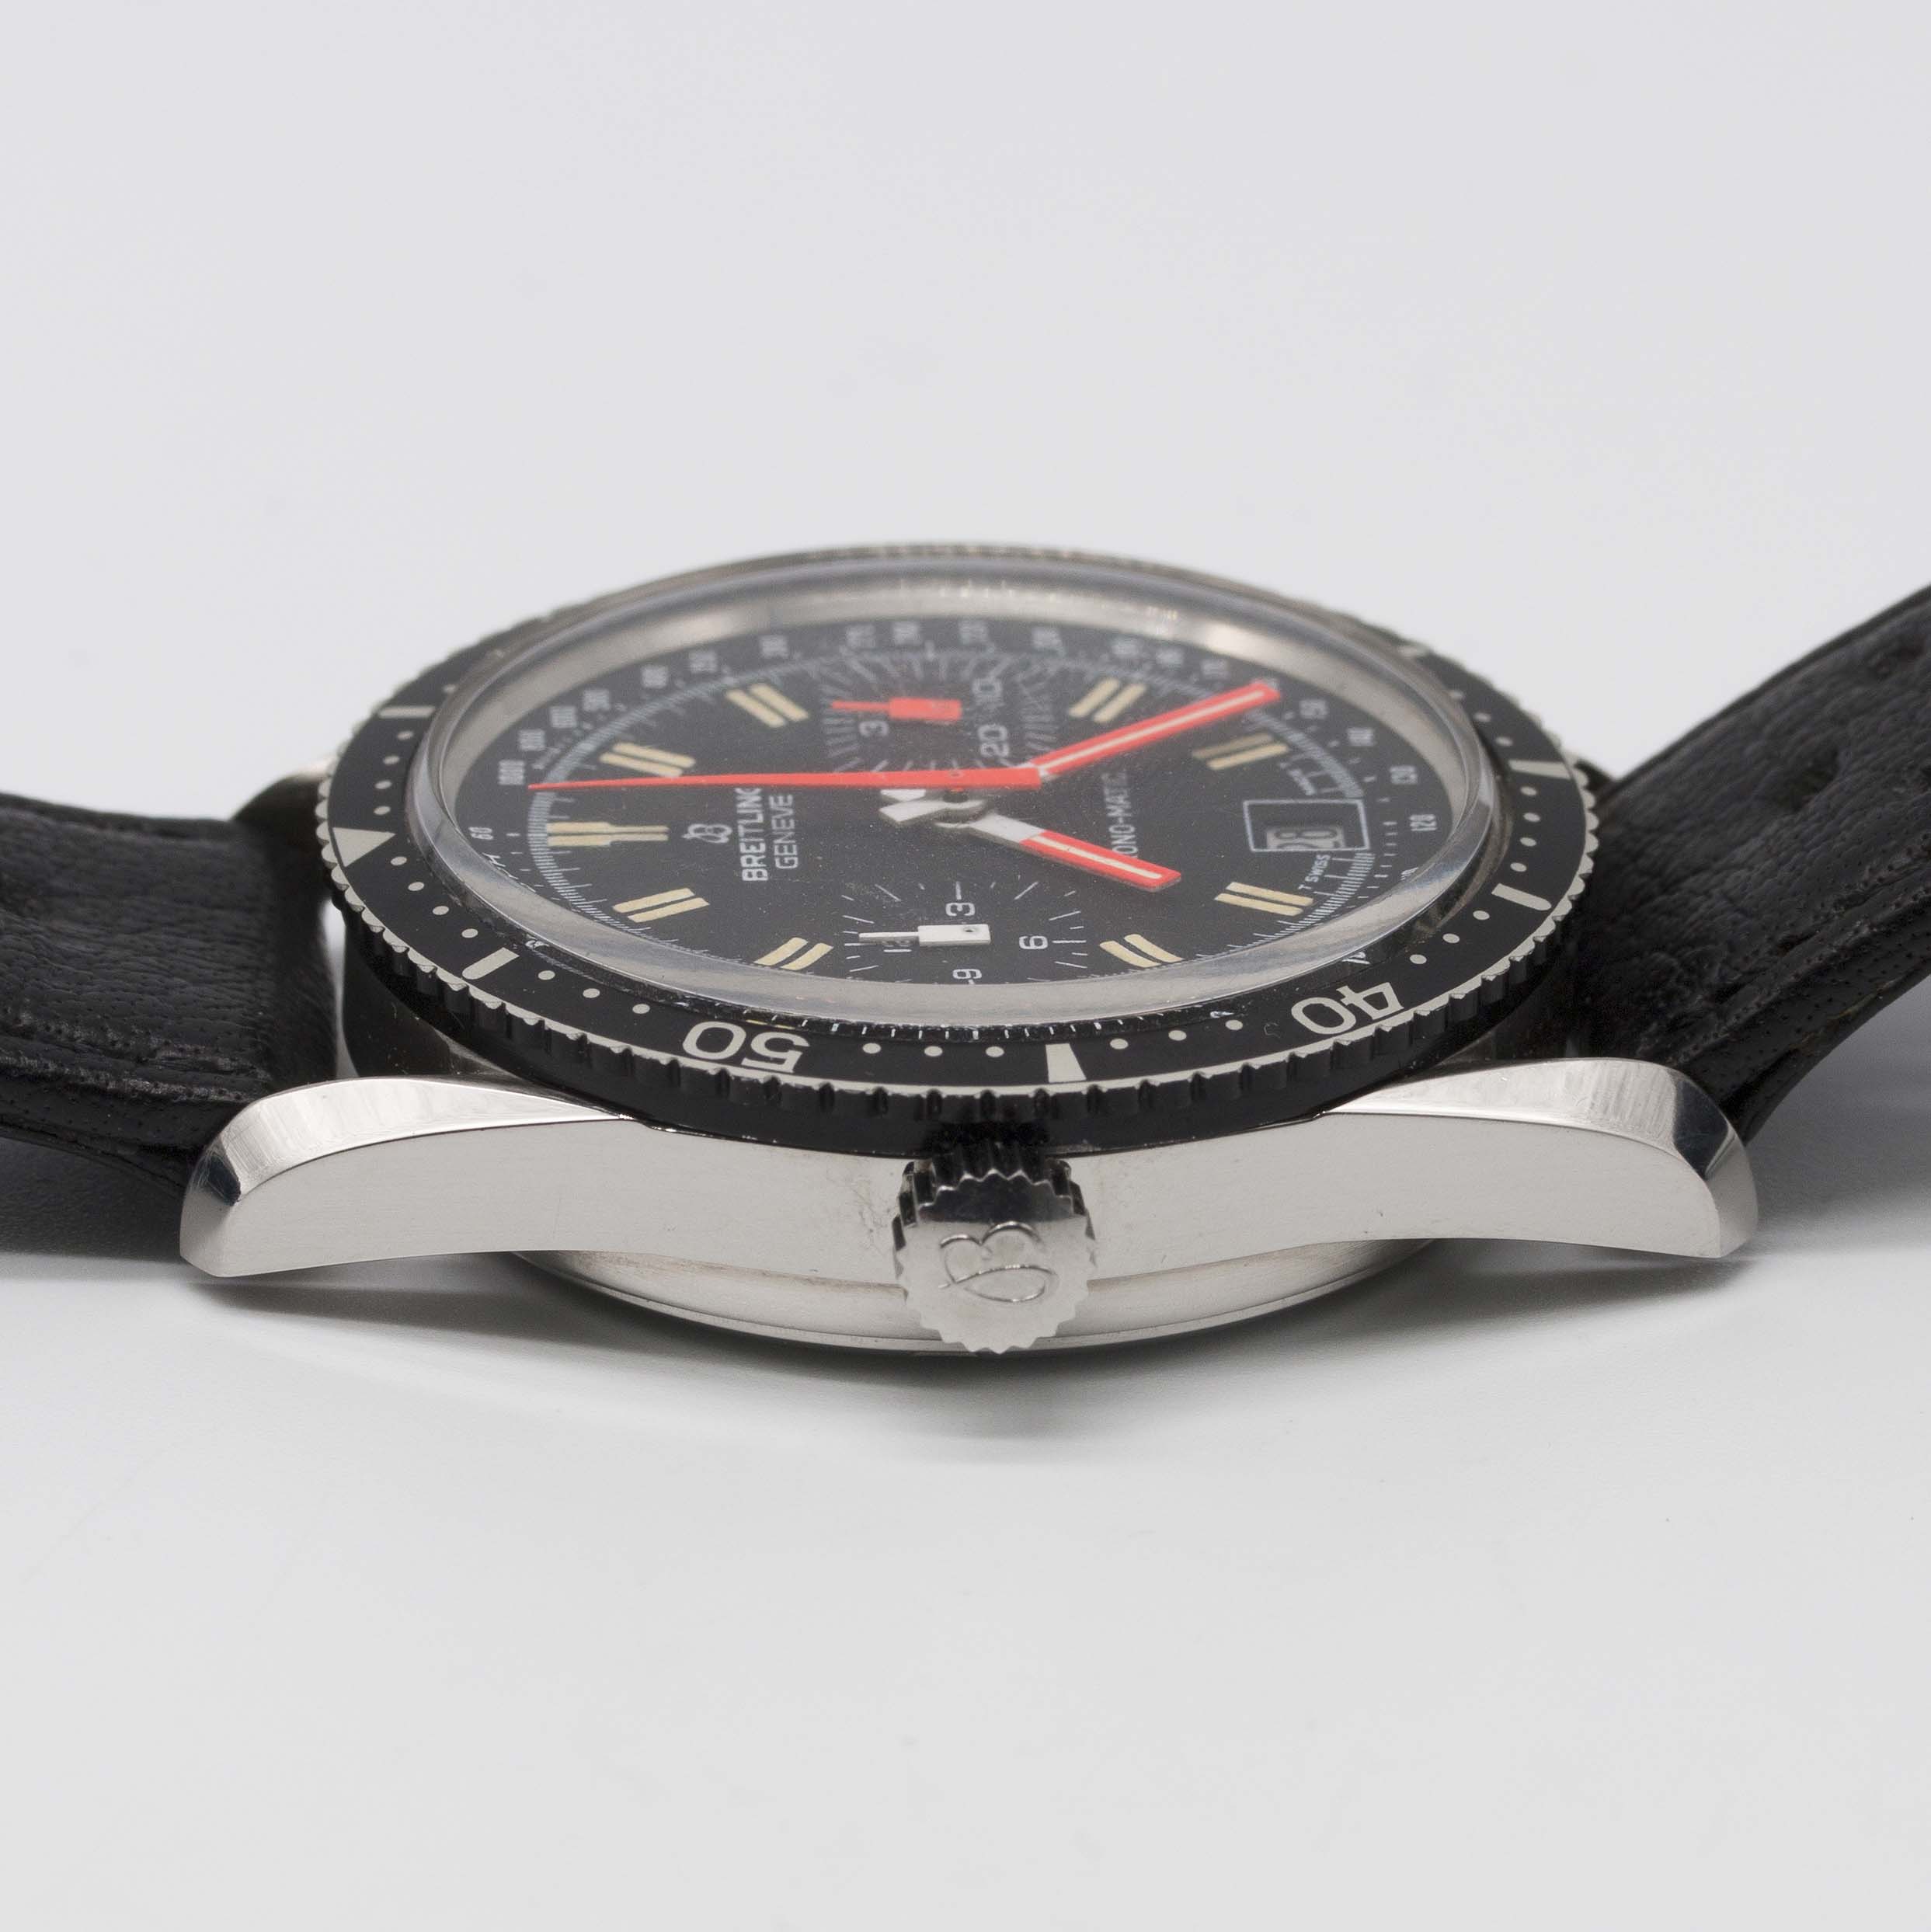 A RARE GENTLEMAN'S STAINLESS STEEL BREITLING CHRONO-MATIC CHRONOGRAPH WRIST WATCH CIRCA 1977, REF. - Image 11 of 12